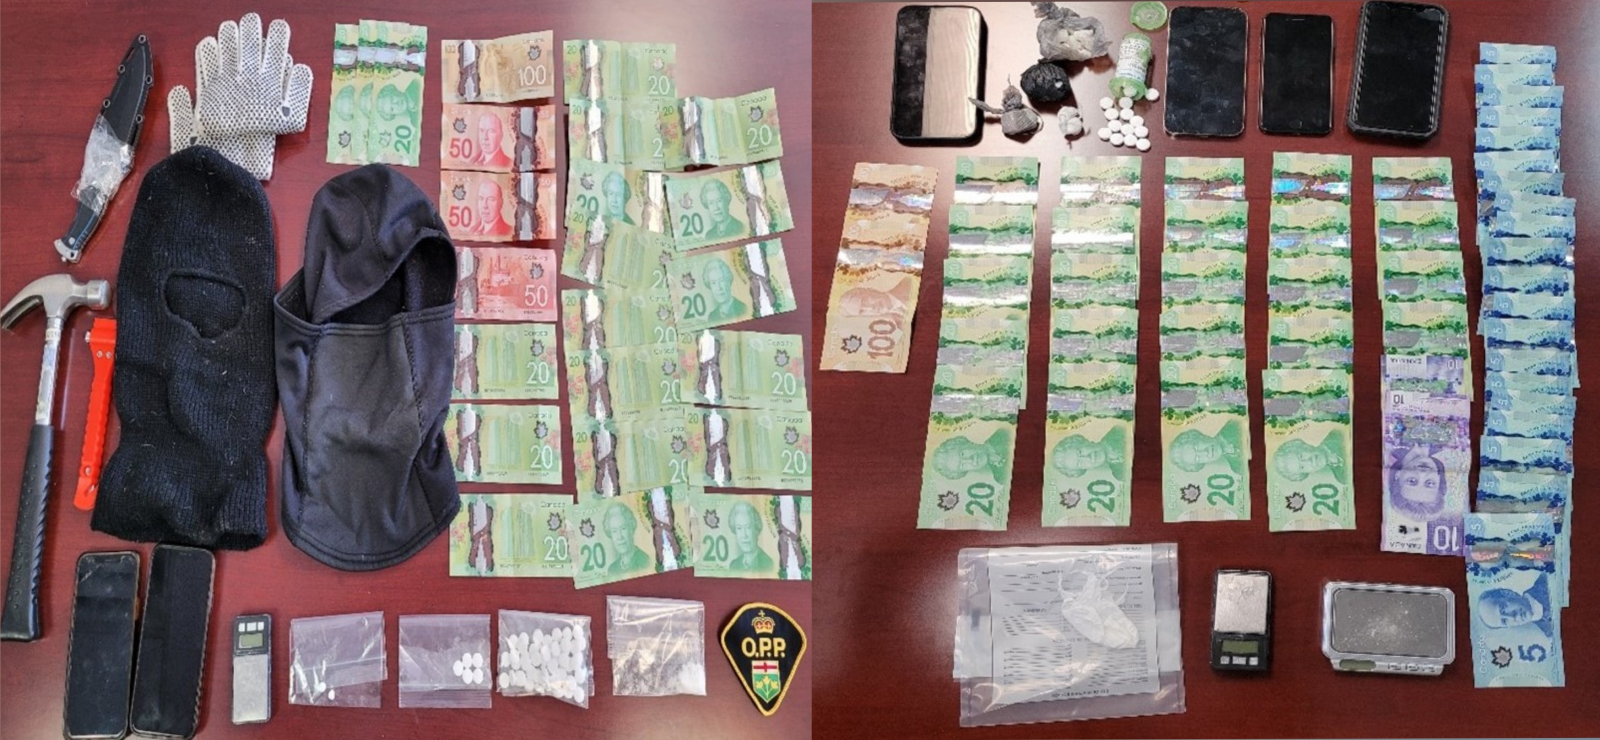 Three arrested in major drug operation, one from Clarence-Rockland